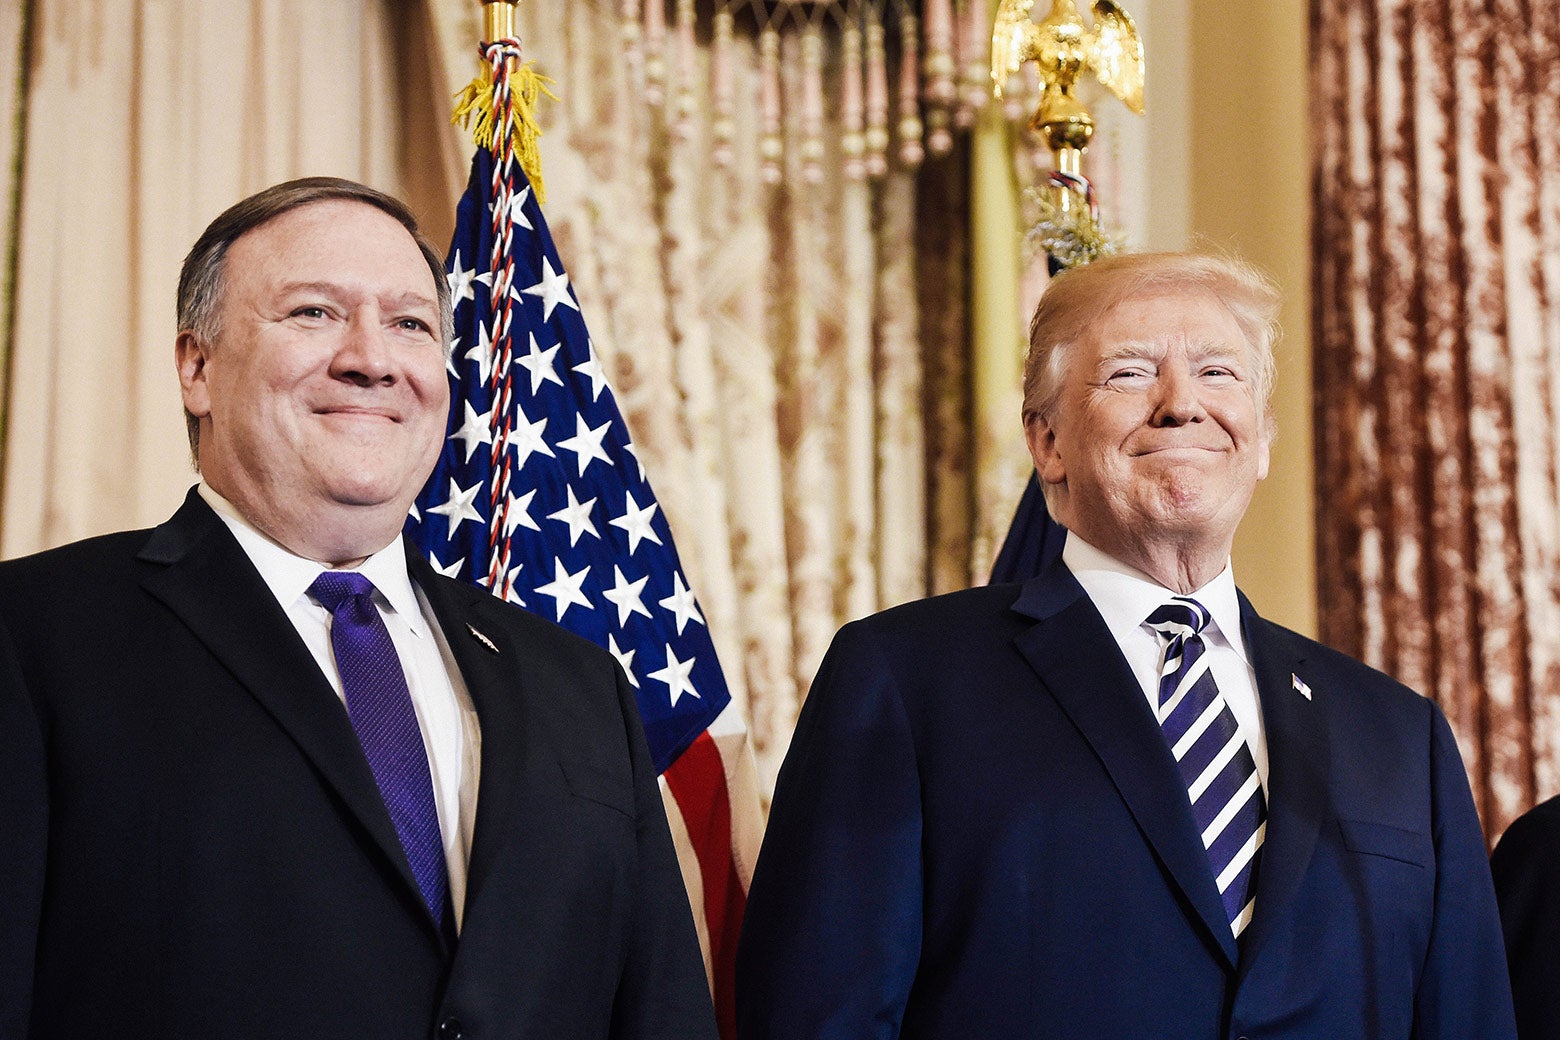 Mike Pompeo stands beside Donald Trump in an ornate room.